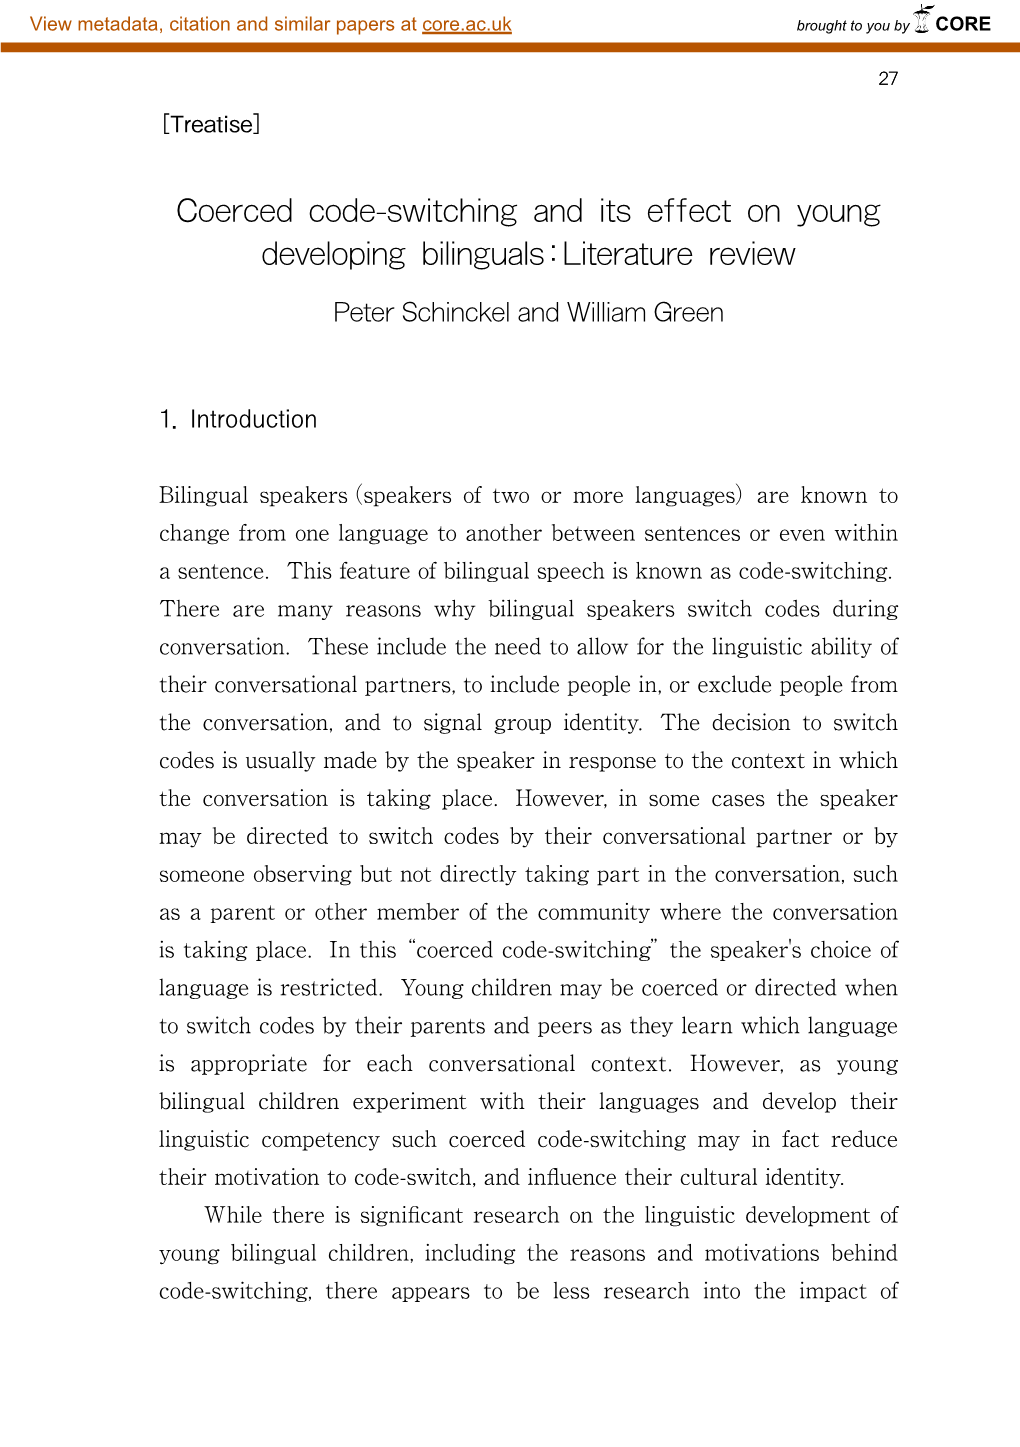 Coerced Code-Switching and Its Effect on Young Developing Bilinguals: Literature Review